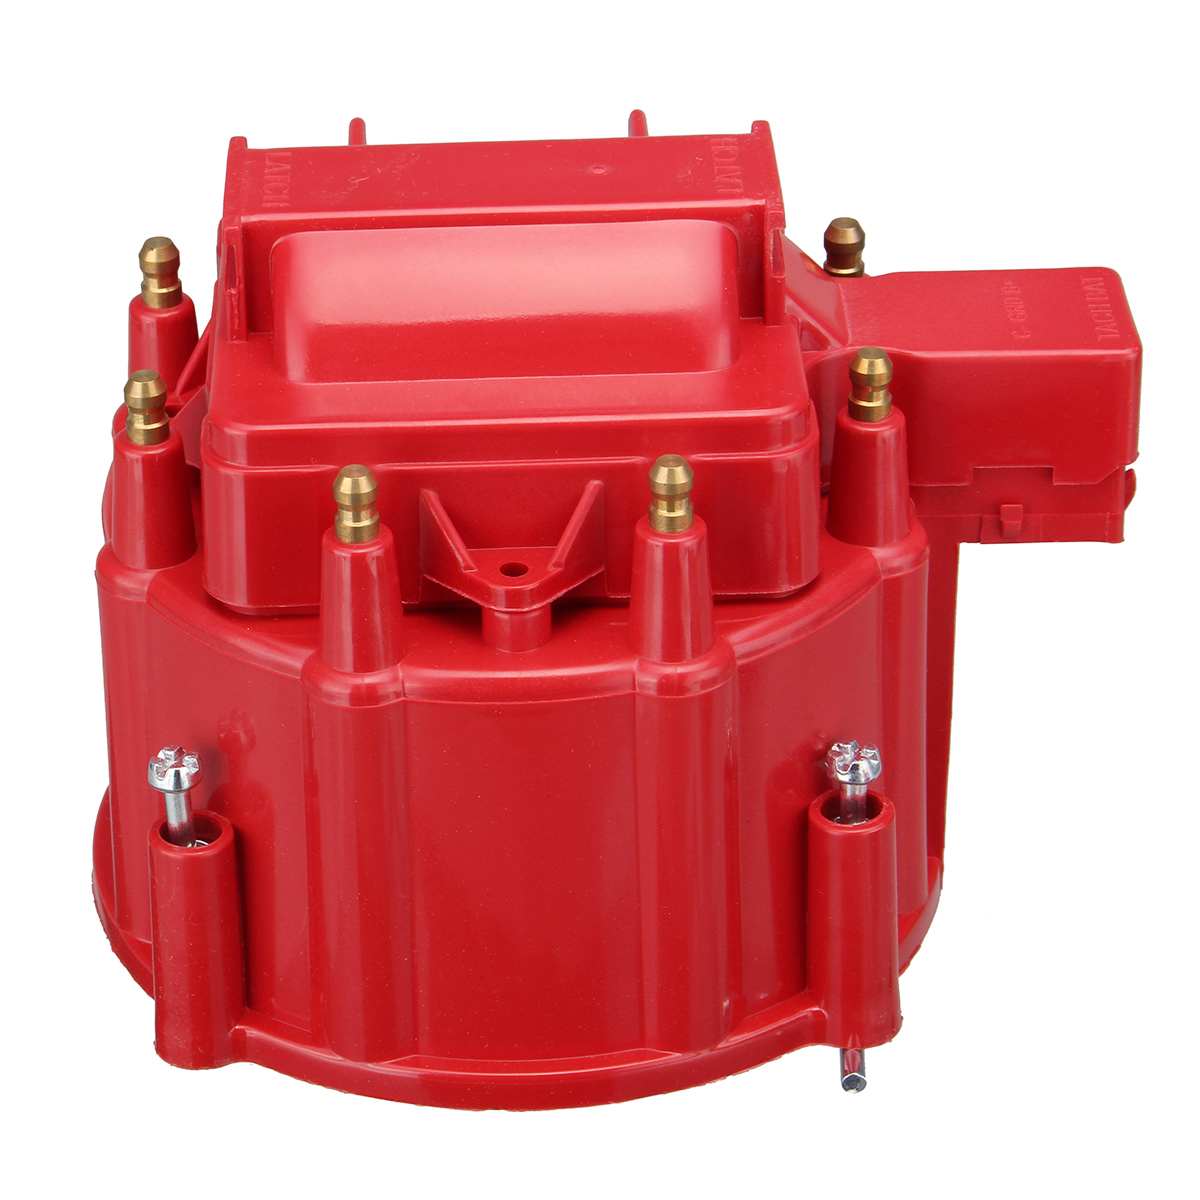 For GM HEI Red Distributor Large Cap Rotor Module Kit For SBC Replacement For Chevy 350 454 Distributor Cap and Rotor Kits